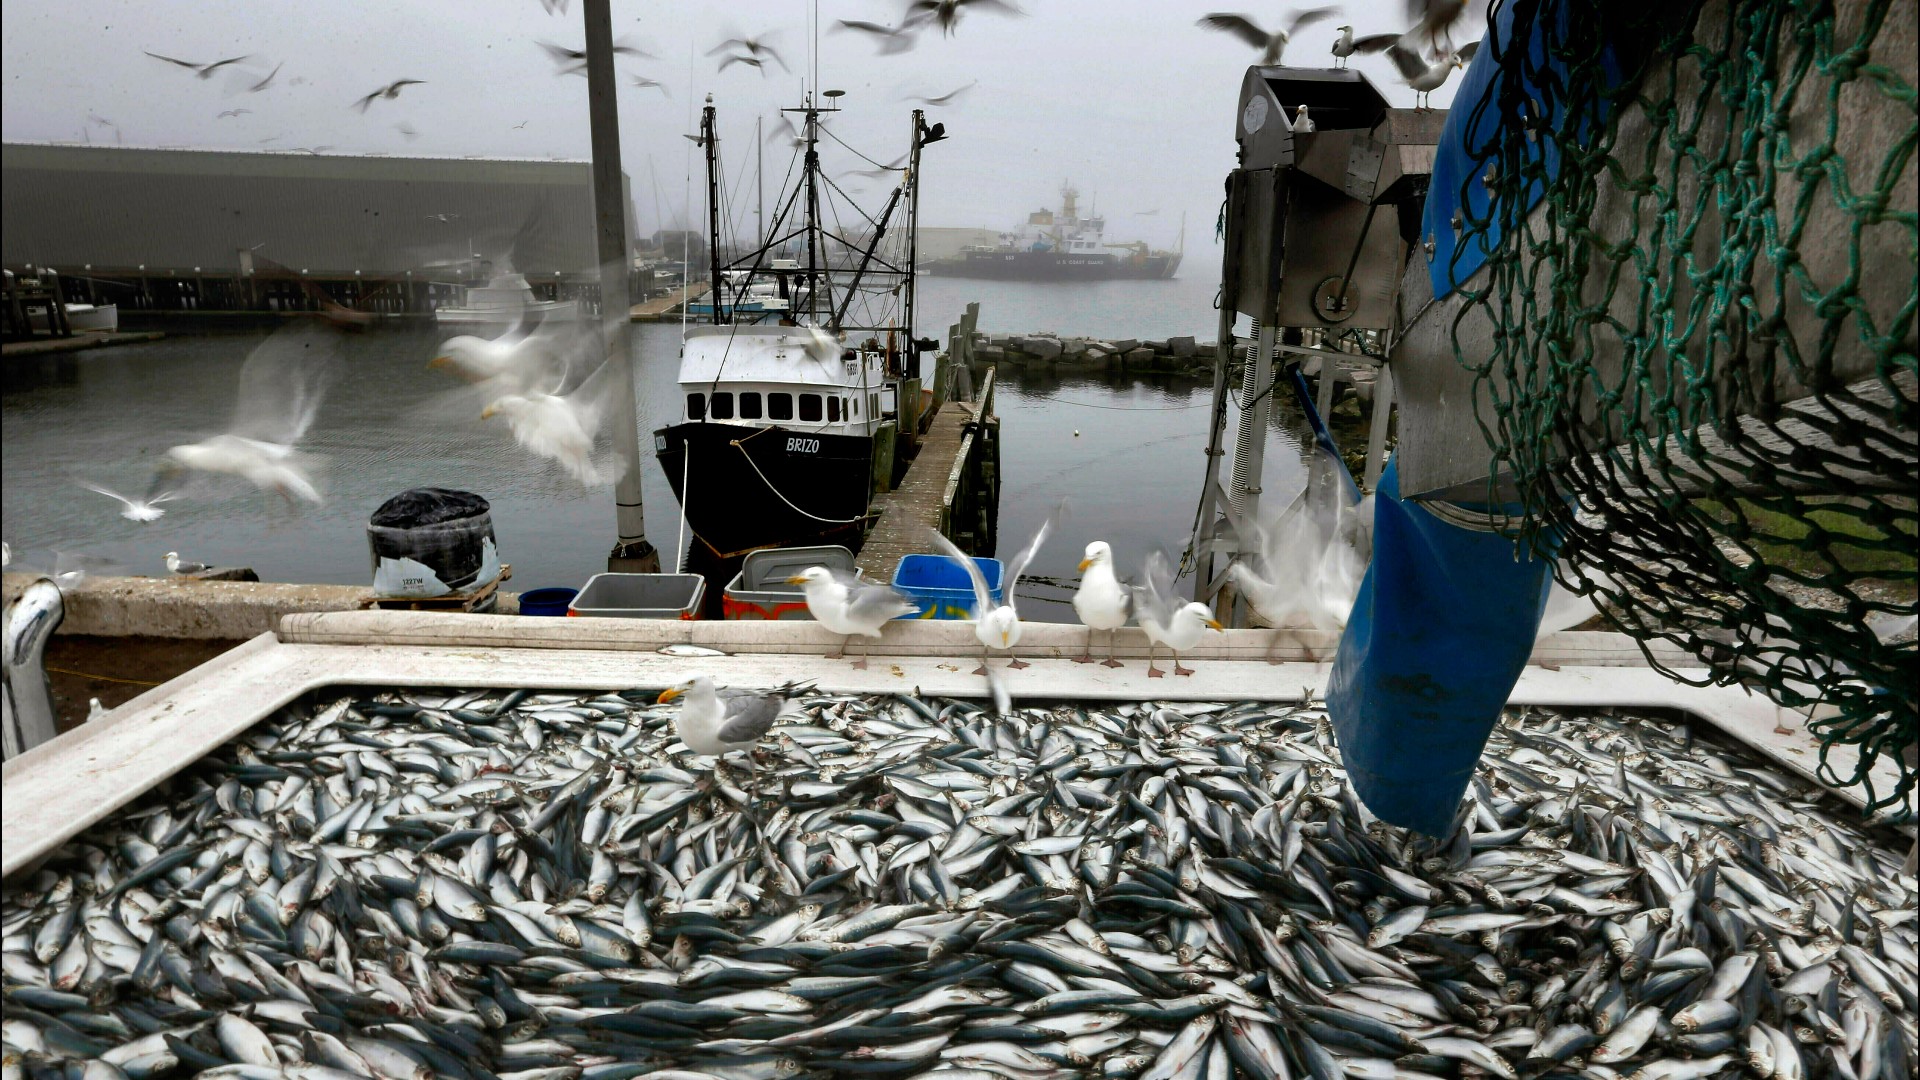 The herring are especially important to New England's fishing industry because they are used as bait by lobster fishermen.